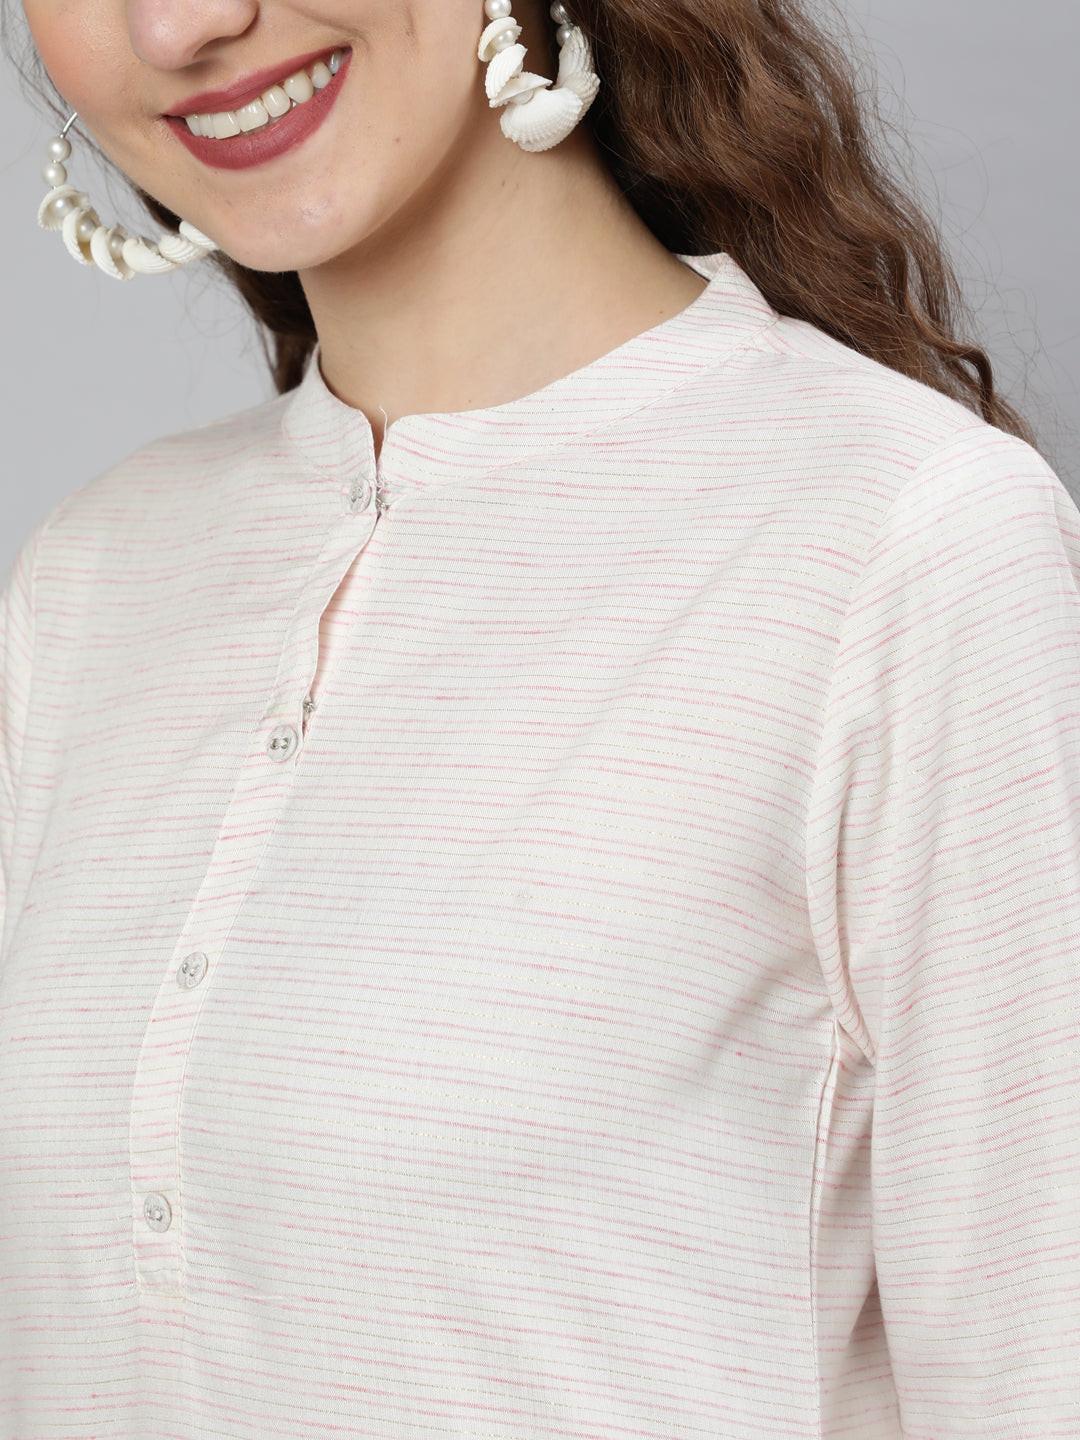 Women's Off-White and Pink Printed Straight Tunic With Three Quarter Sleeves - Nayo Clothing